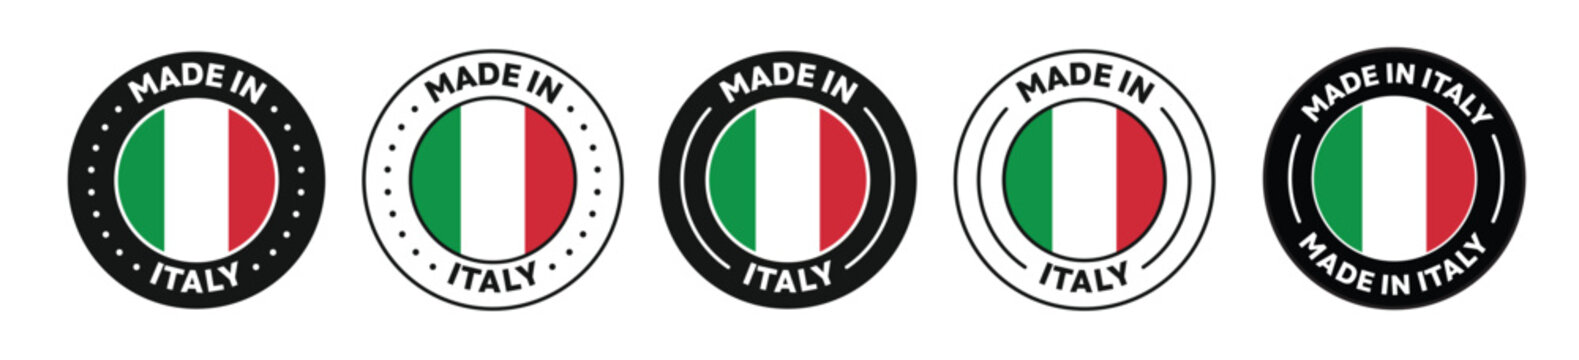 Set of Made in Italy label icons. Made in Italy logo symbol. italian made badge. italy flag. suitable for products of italy. vector illustration